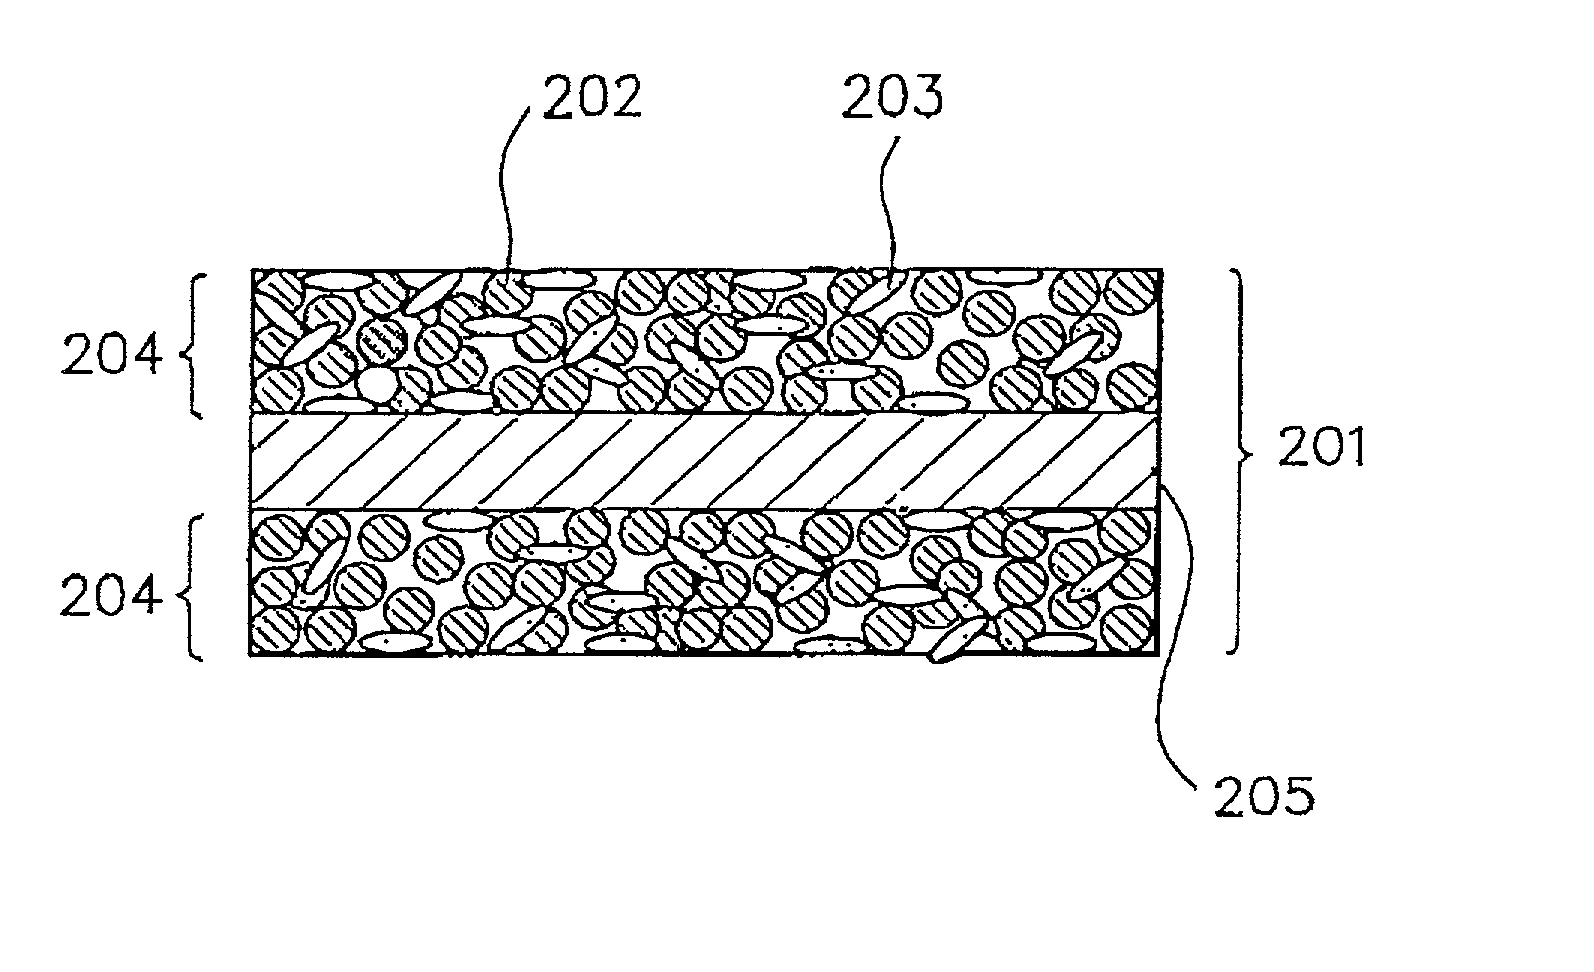 Alkaline rechargeable battery and process for the production thereof